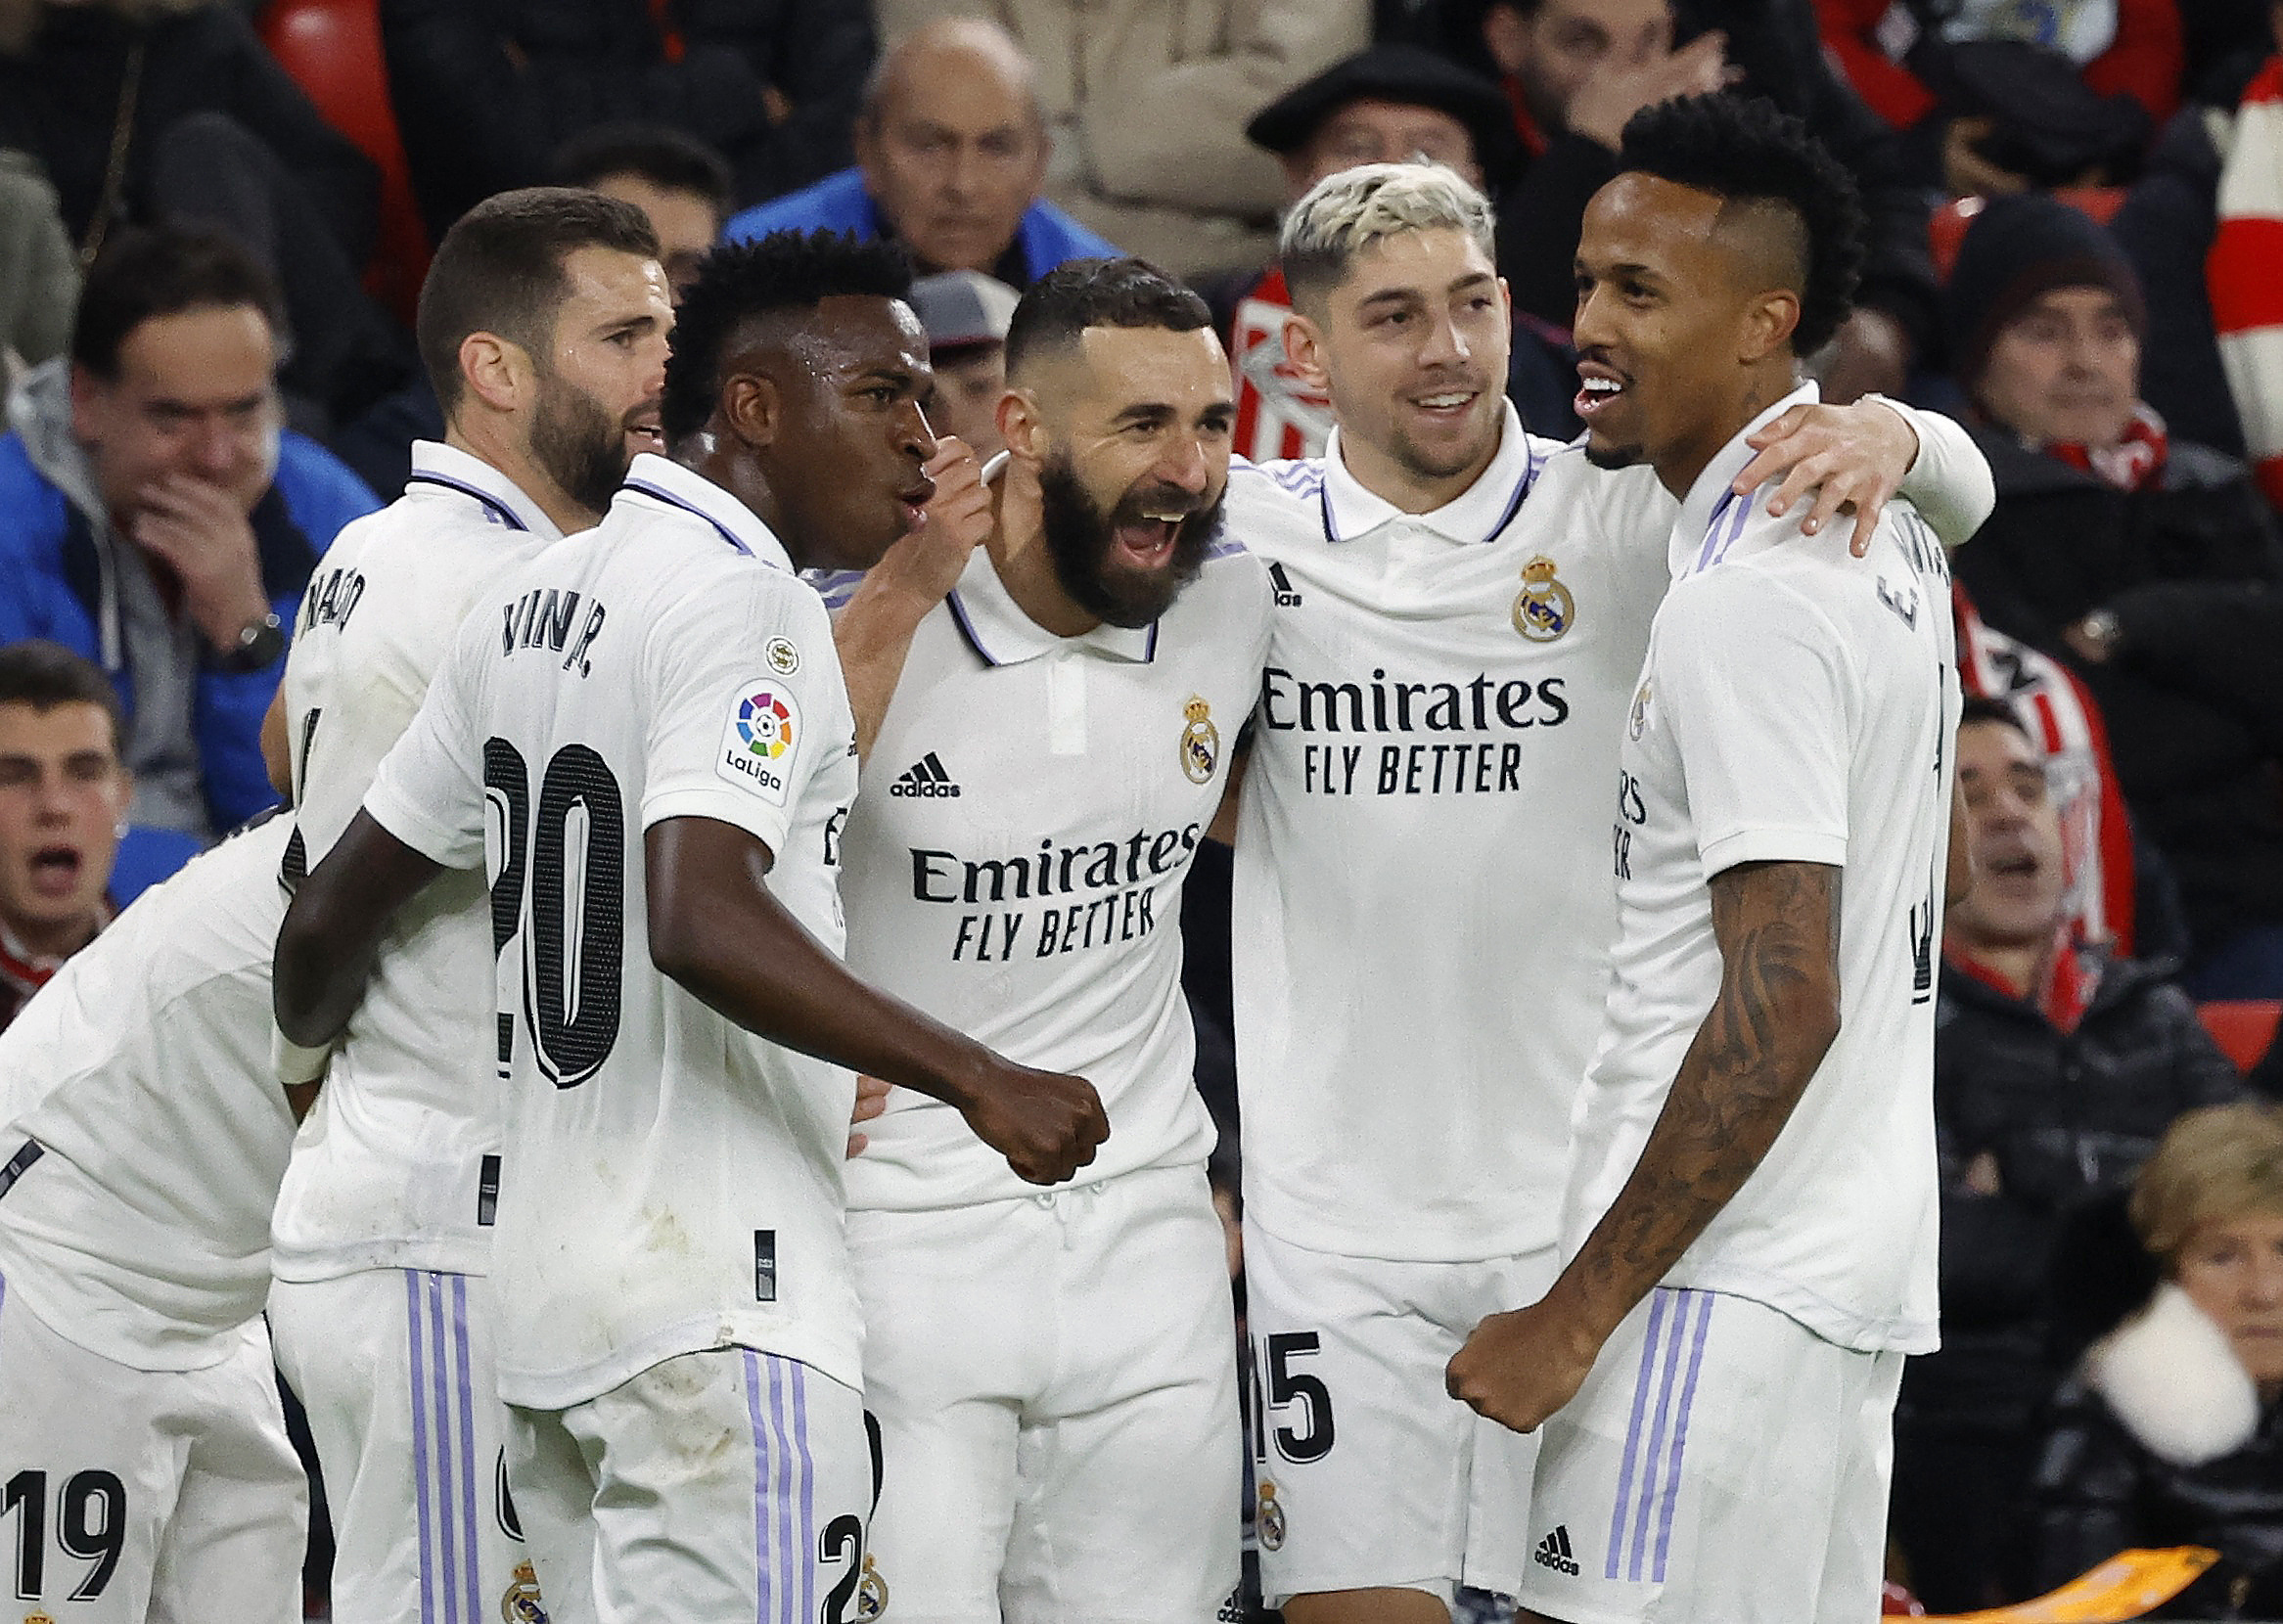 Real Madrid must start learning how to win without always relying